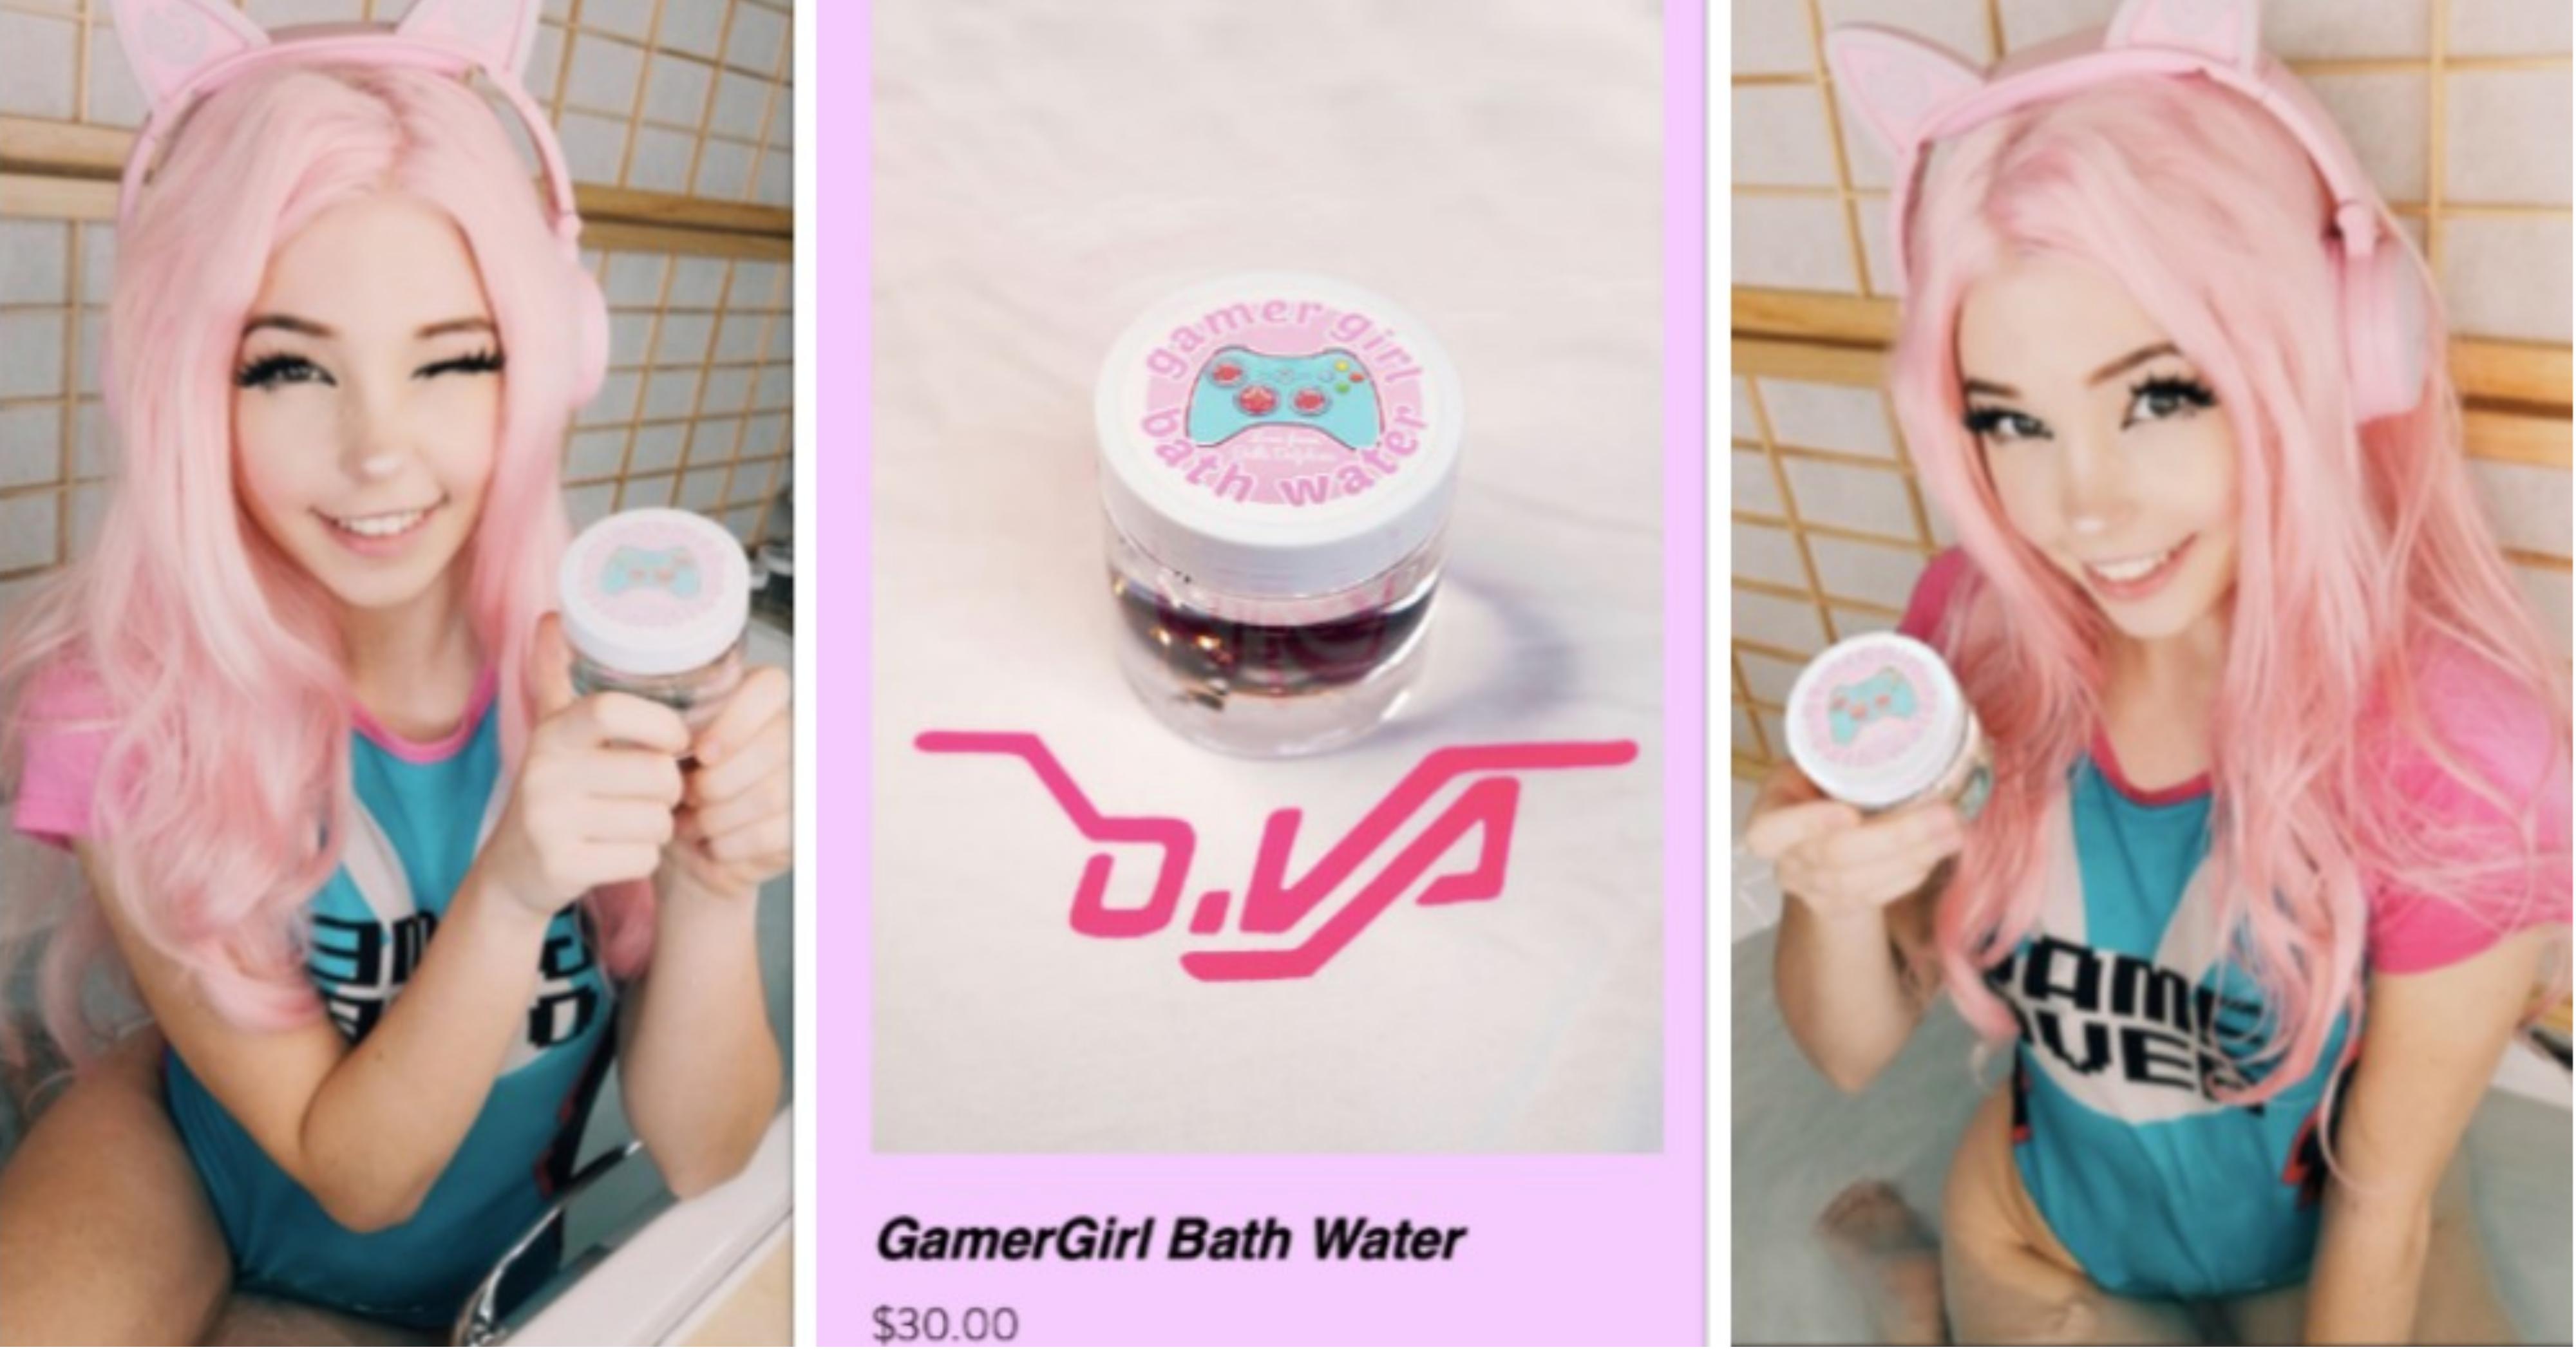 Instagram Account Of 19 Year Old Gamer Girl Who Sold S 40 Bath Water Deleted Mothership Sg